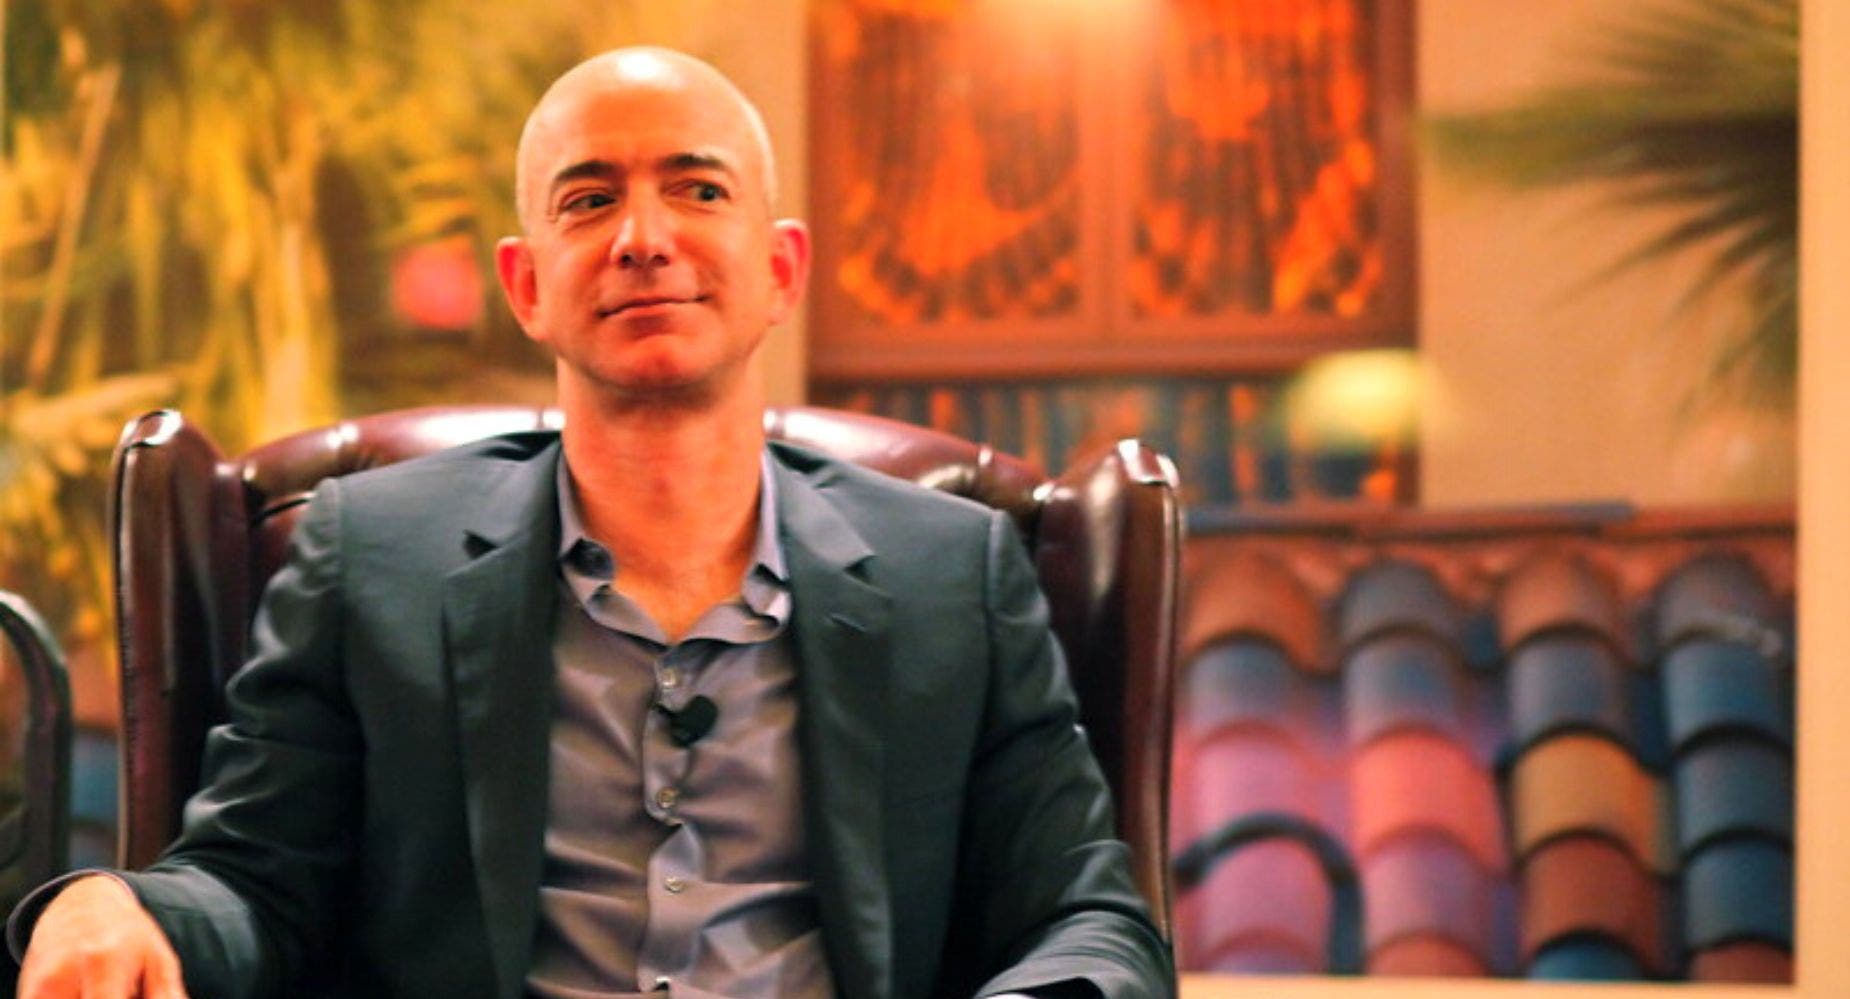 Jeff Bezos' Girlfriend Is Also Rich, She Just Donated $1M To This Charity